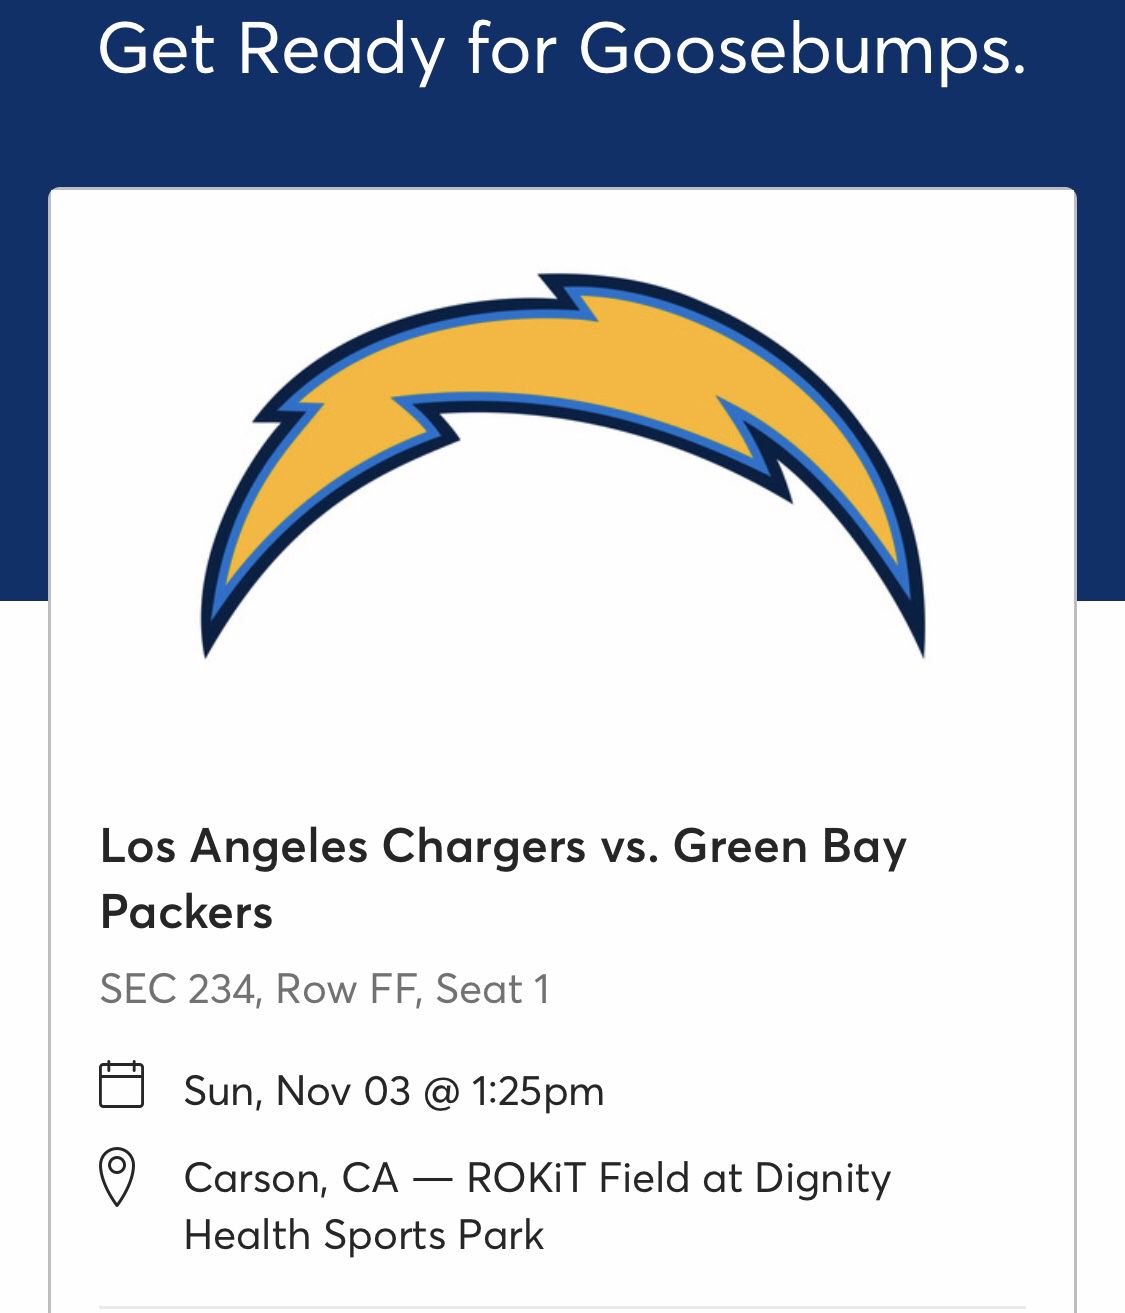 Chargers vs Packers ticket November 3, 2019